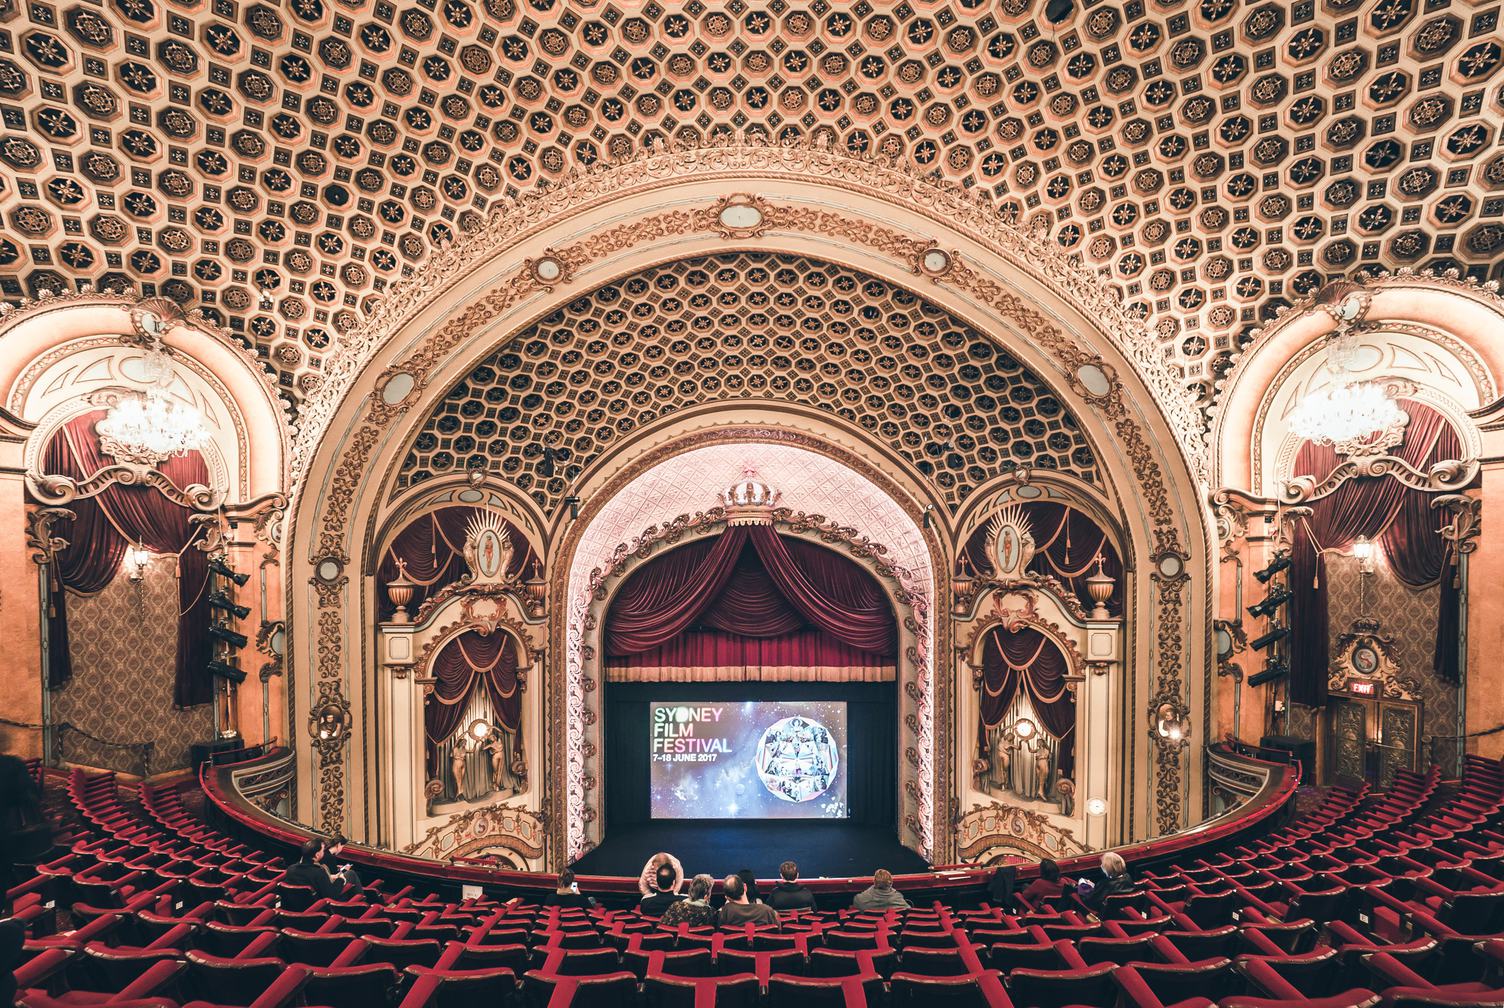 Interior Ceiling and Stage from the Balcony, State Theatre, Sdney